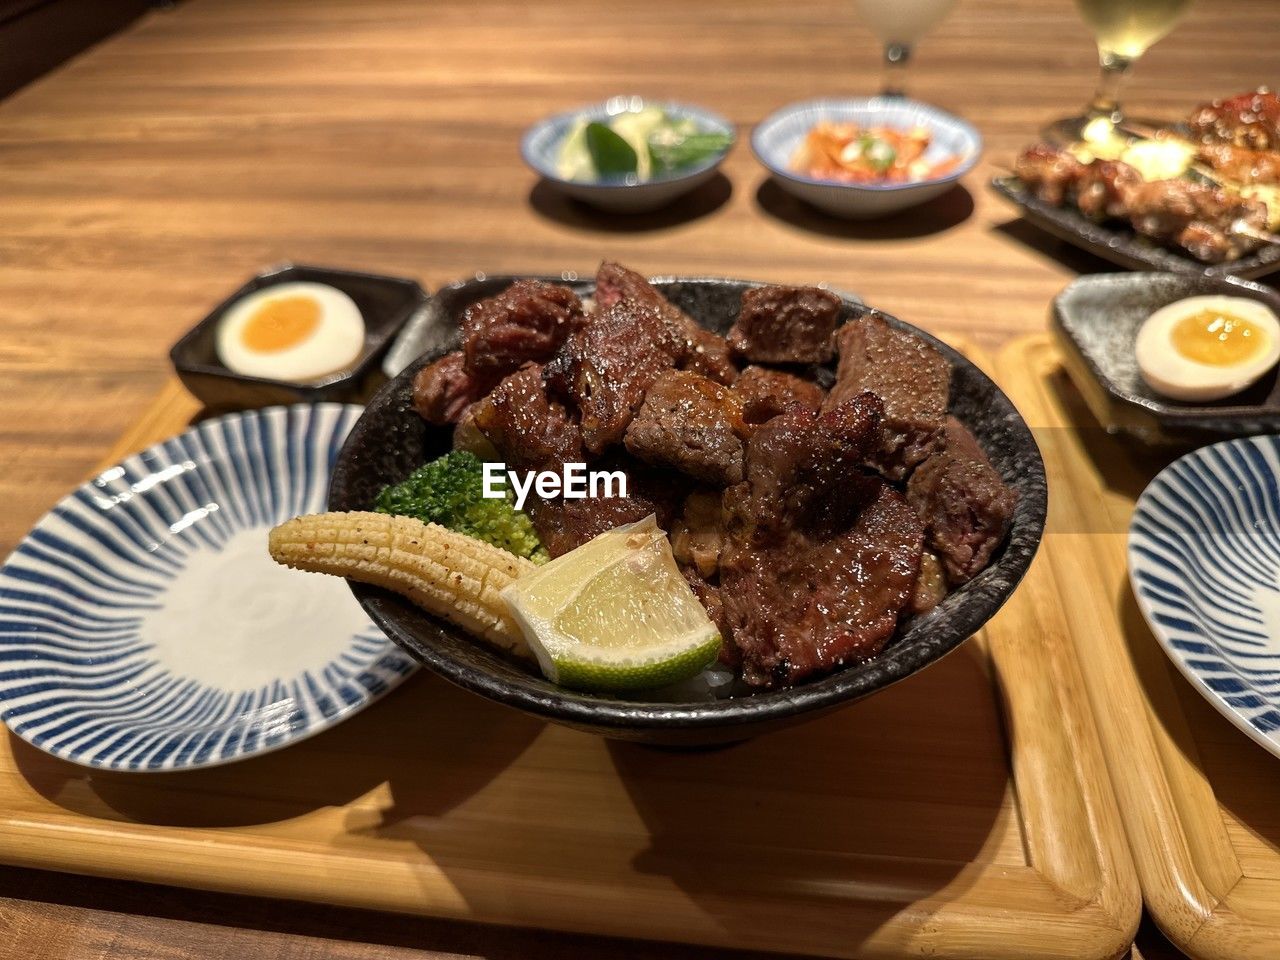 food and drink, food, meat, vegetable, table, dish, healthy eating, plate, freshness, meal, cuisine, red meat, beef, no people, indoors, dinner, wood, galbi, fruit, wellbeing, grilled, barbecue, focus on foreground, restaurant